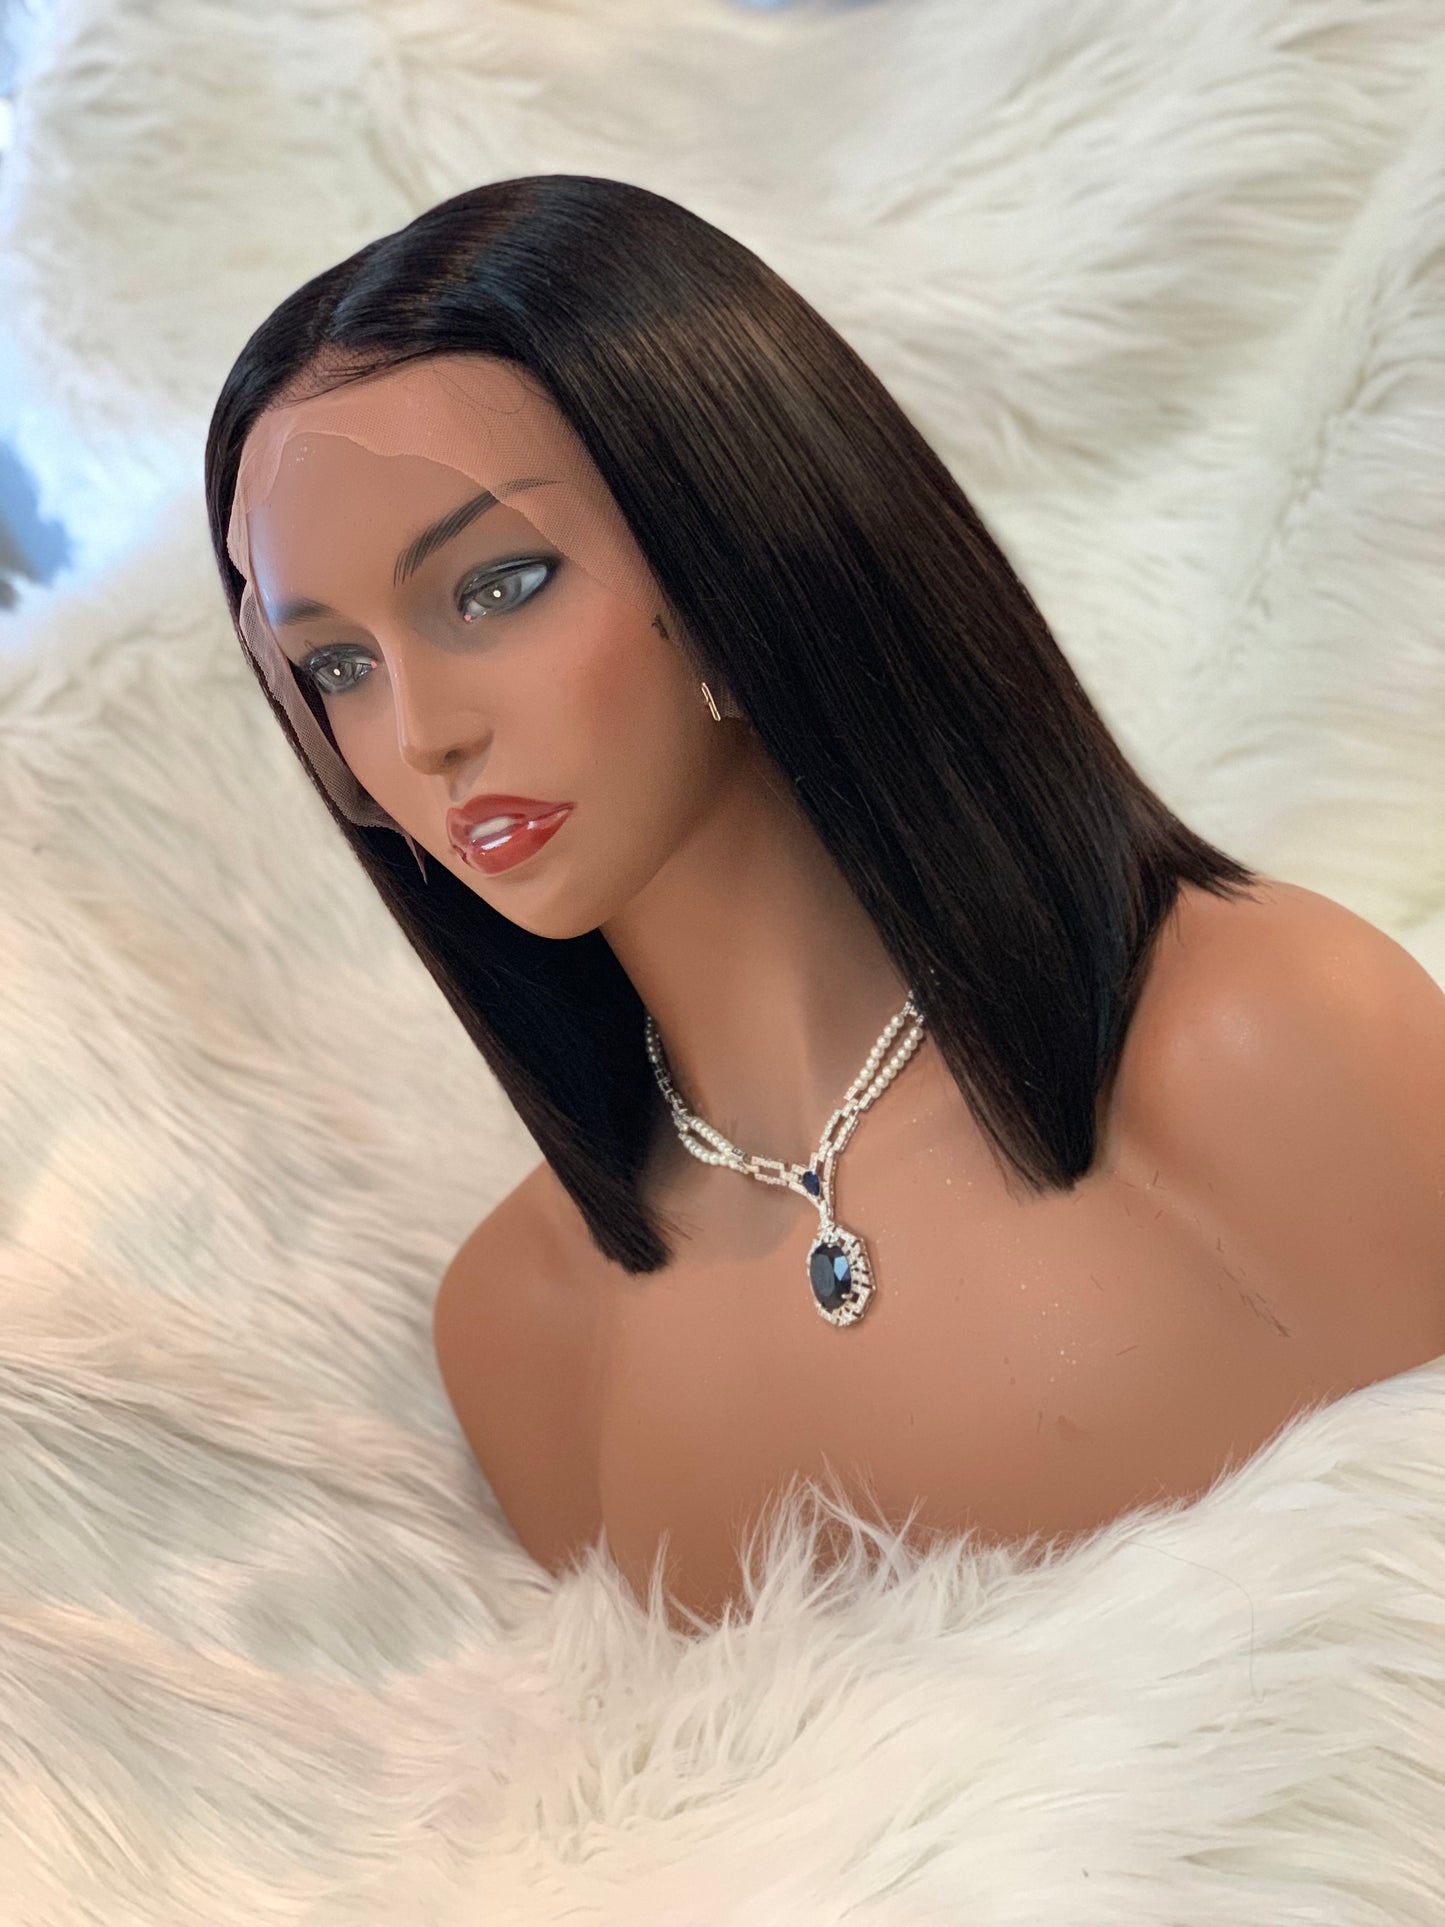 “Straight Blunt” Lace front bob wig